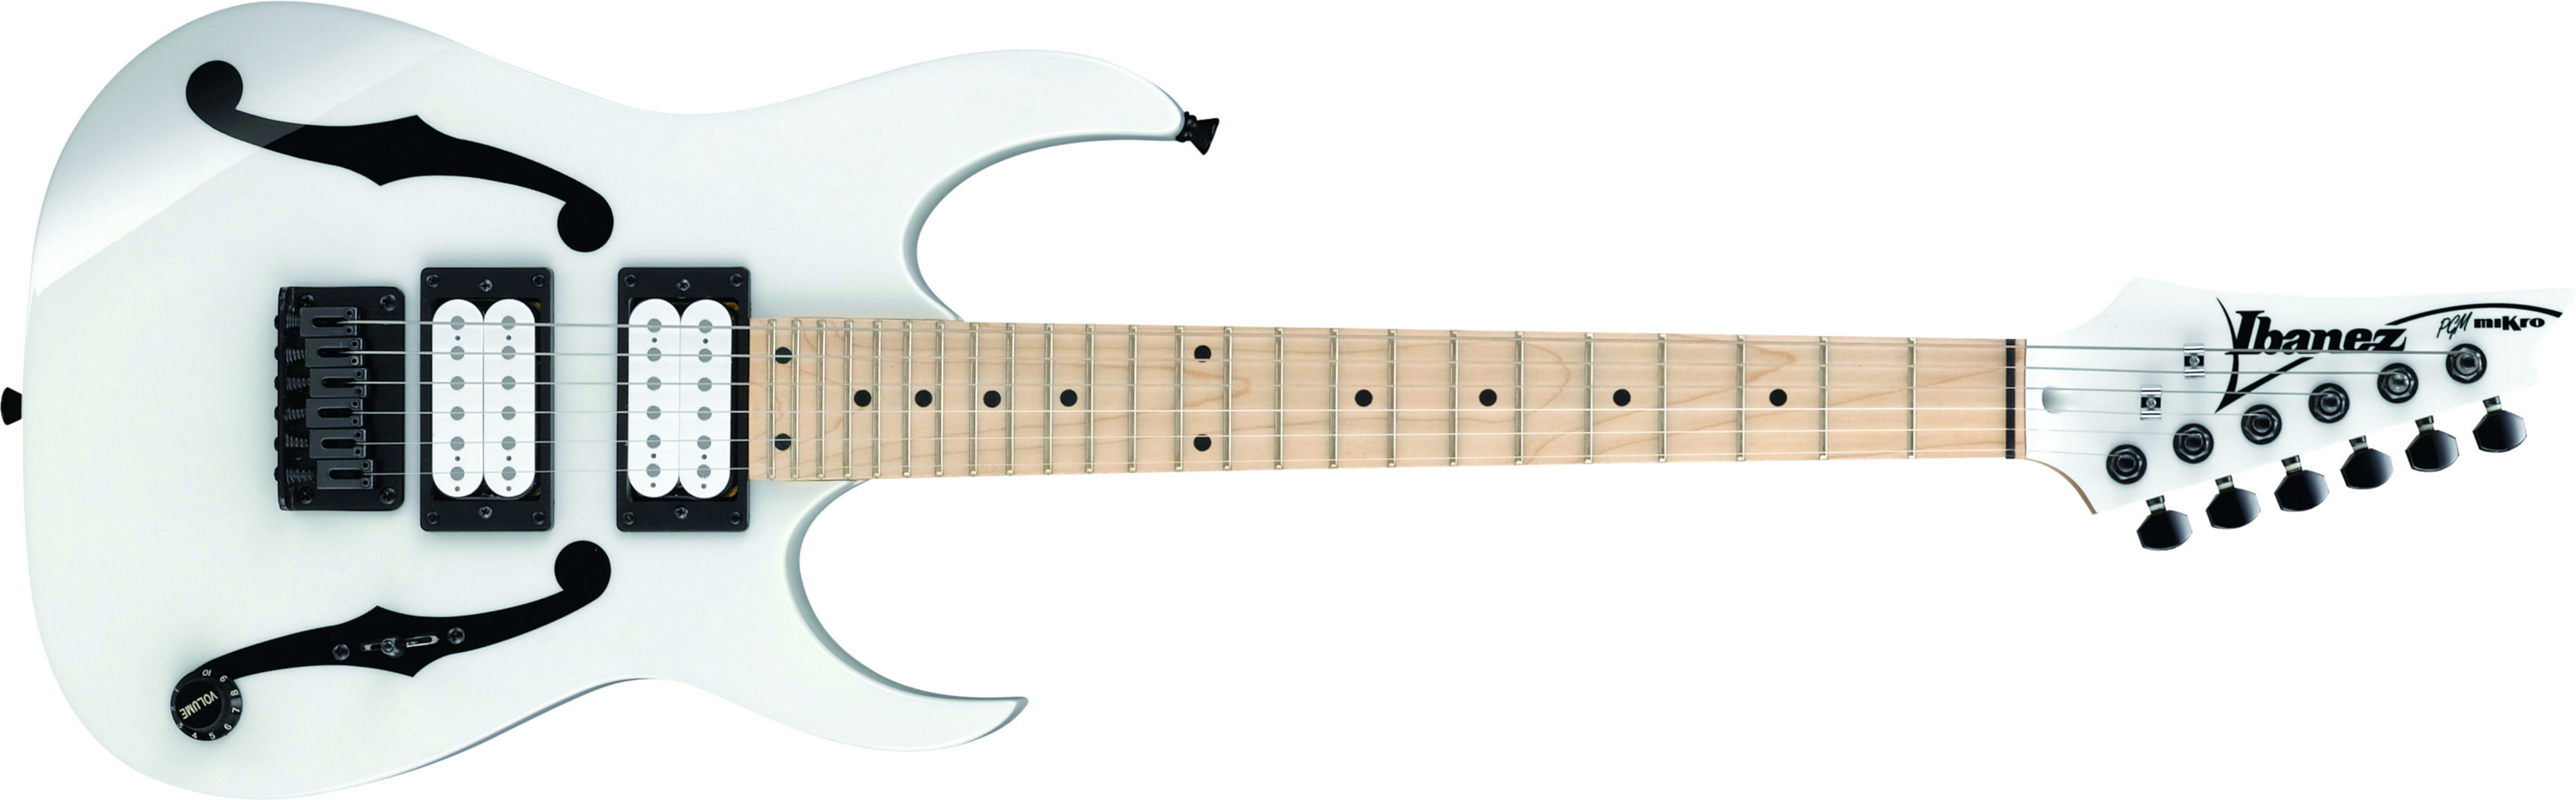 Ibanez Paul Gilbert Pgmm31 Wh Signature Junior Hh Ht Mn - White - Electric guitar for kids - Main picture